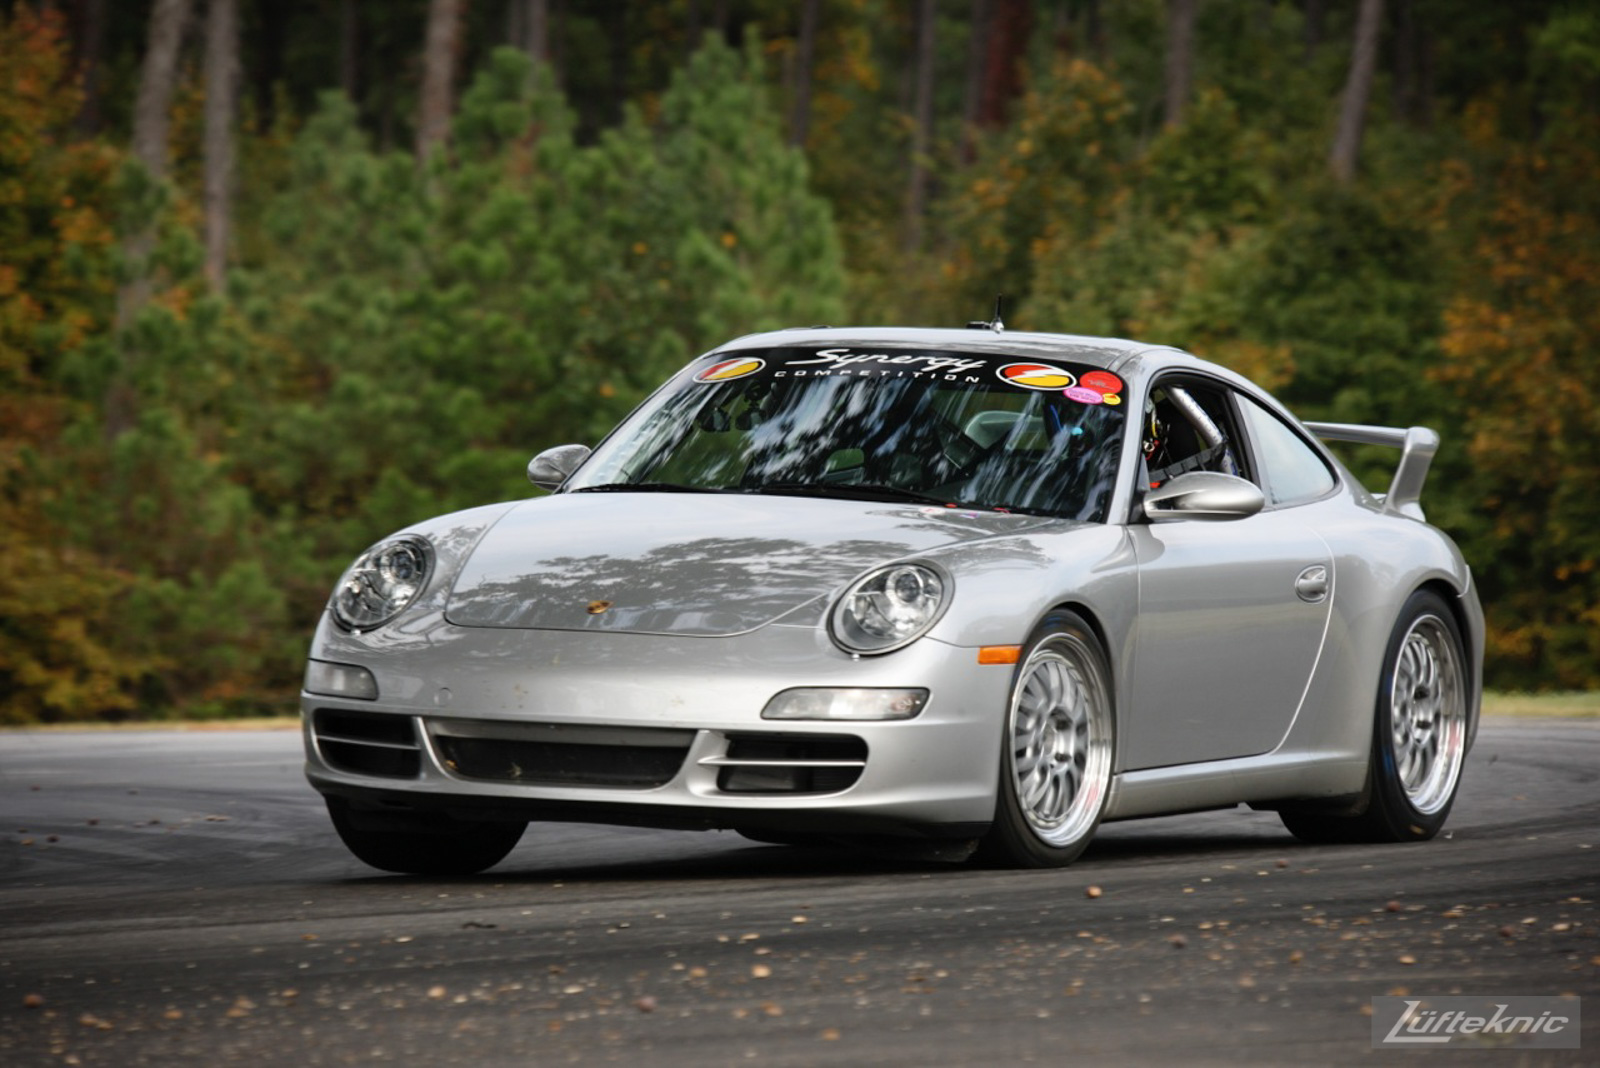 Synergy Racing modified Porsche 911 track car on track.